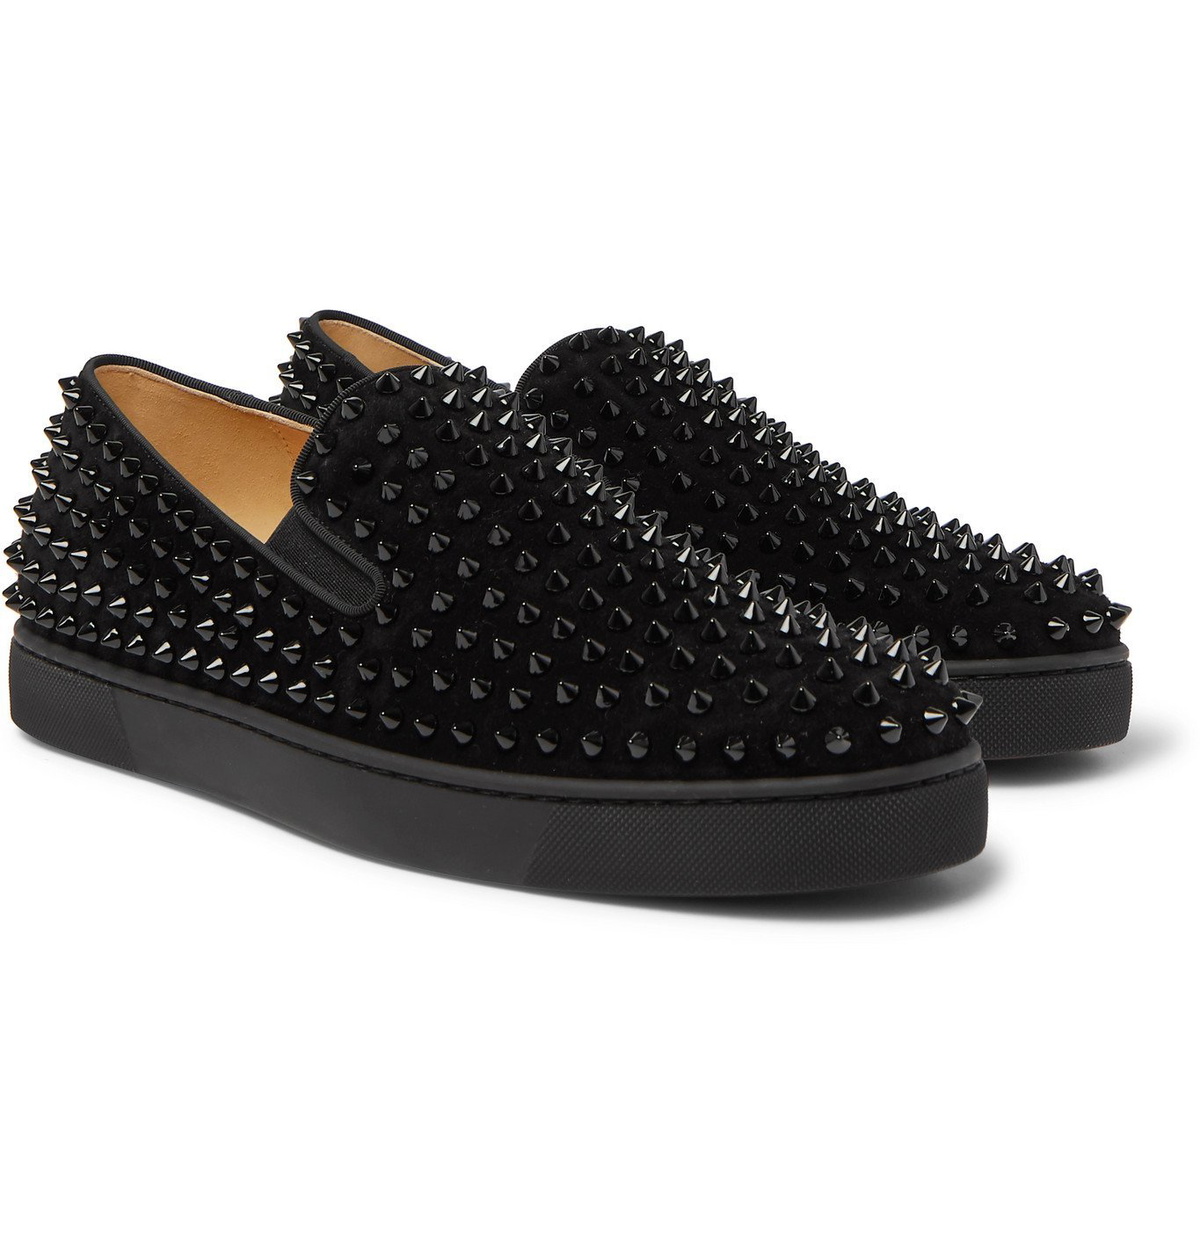 Christian Louboutin - Roller-Boat Spiked Suede Slip-On Sneakers